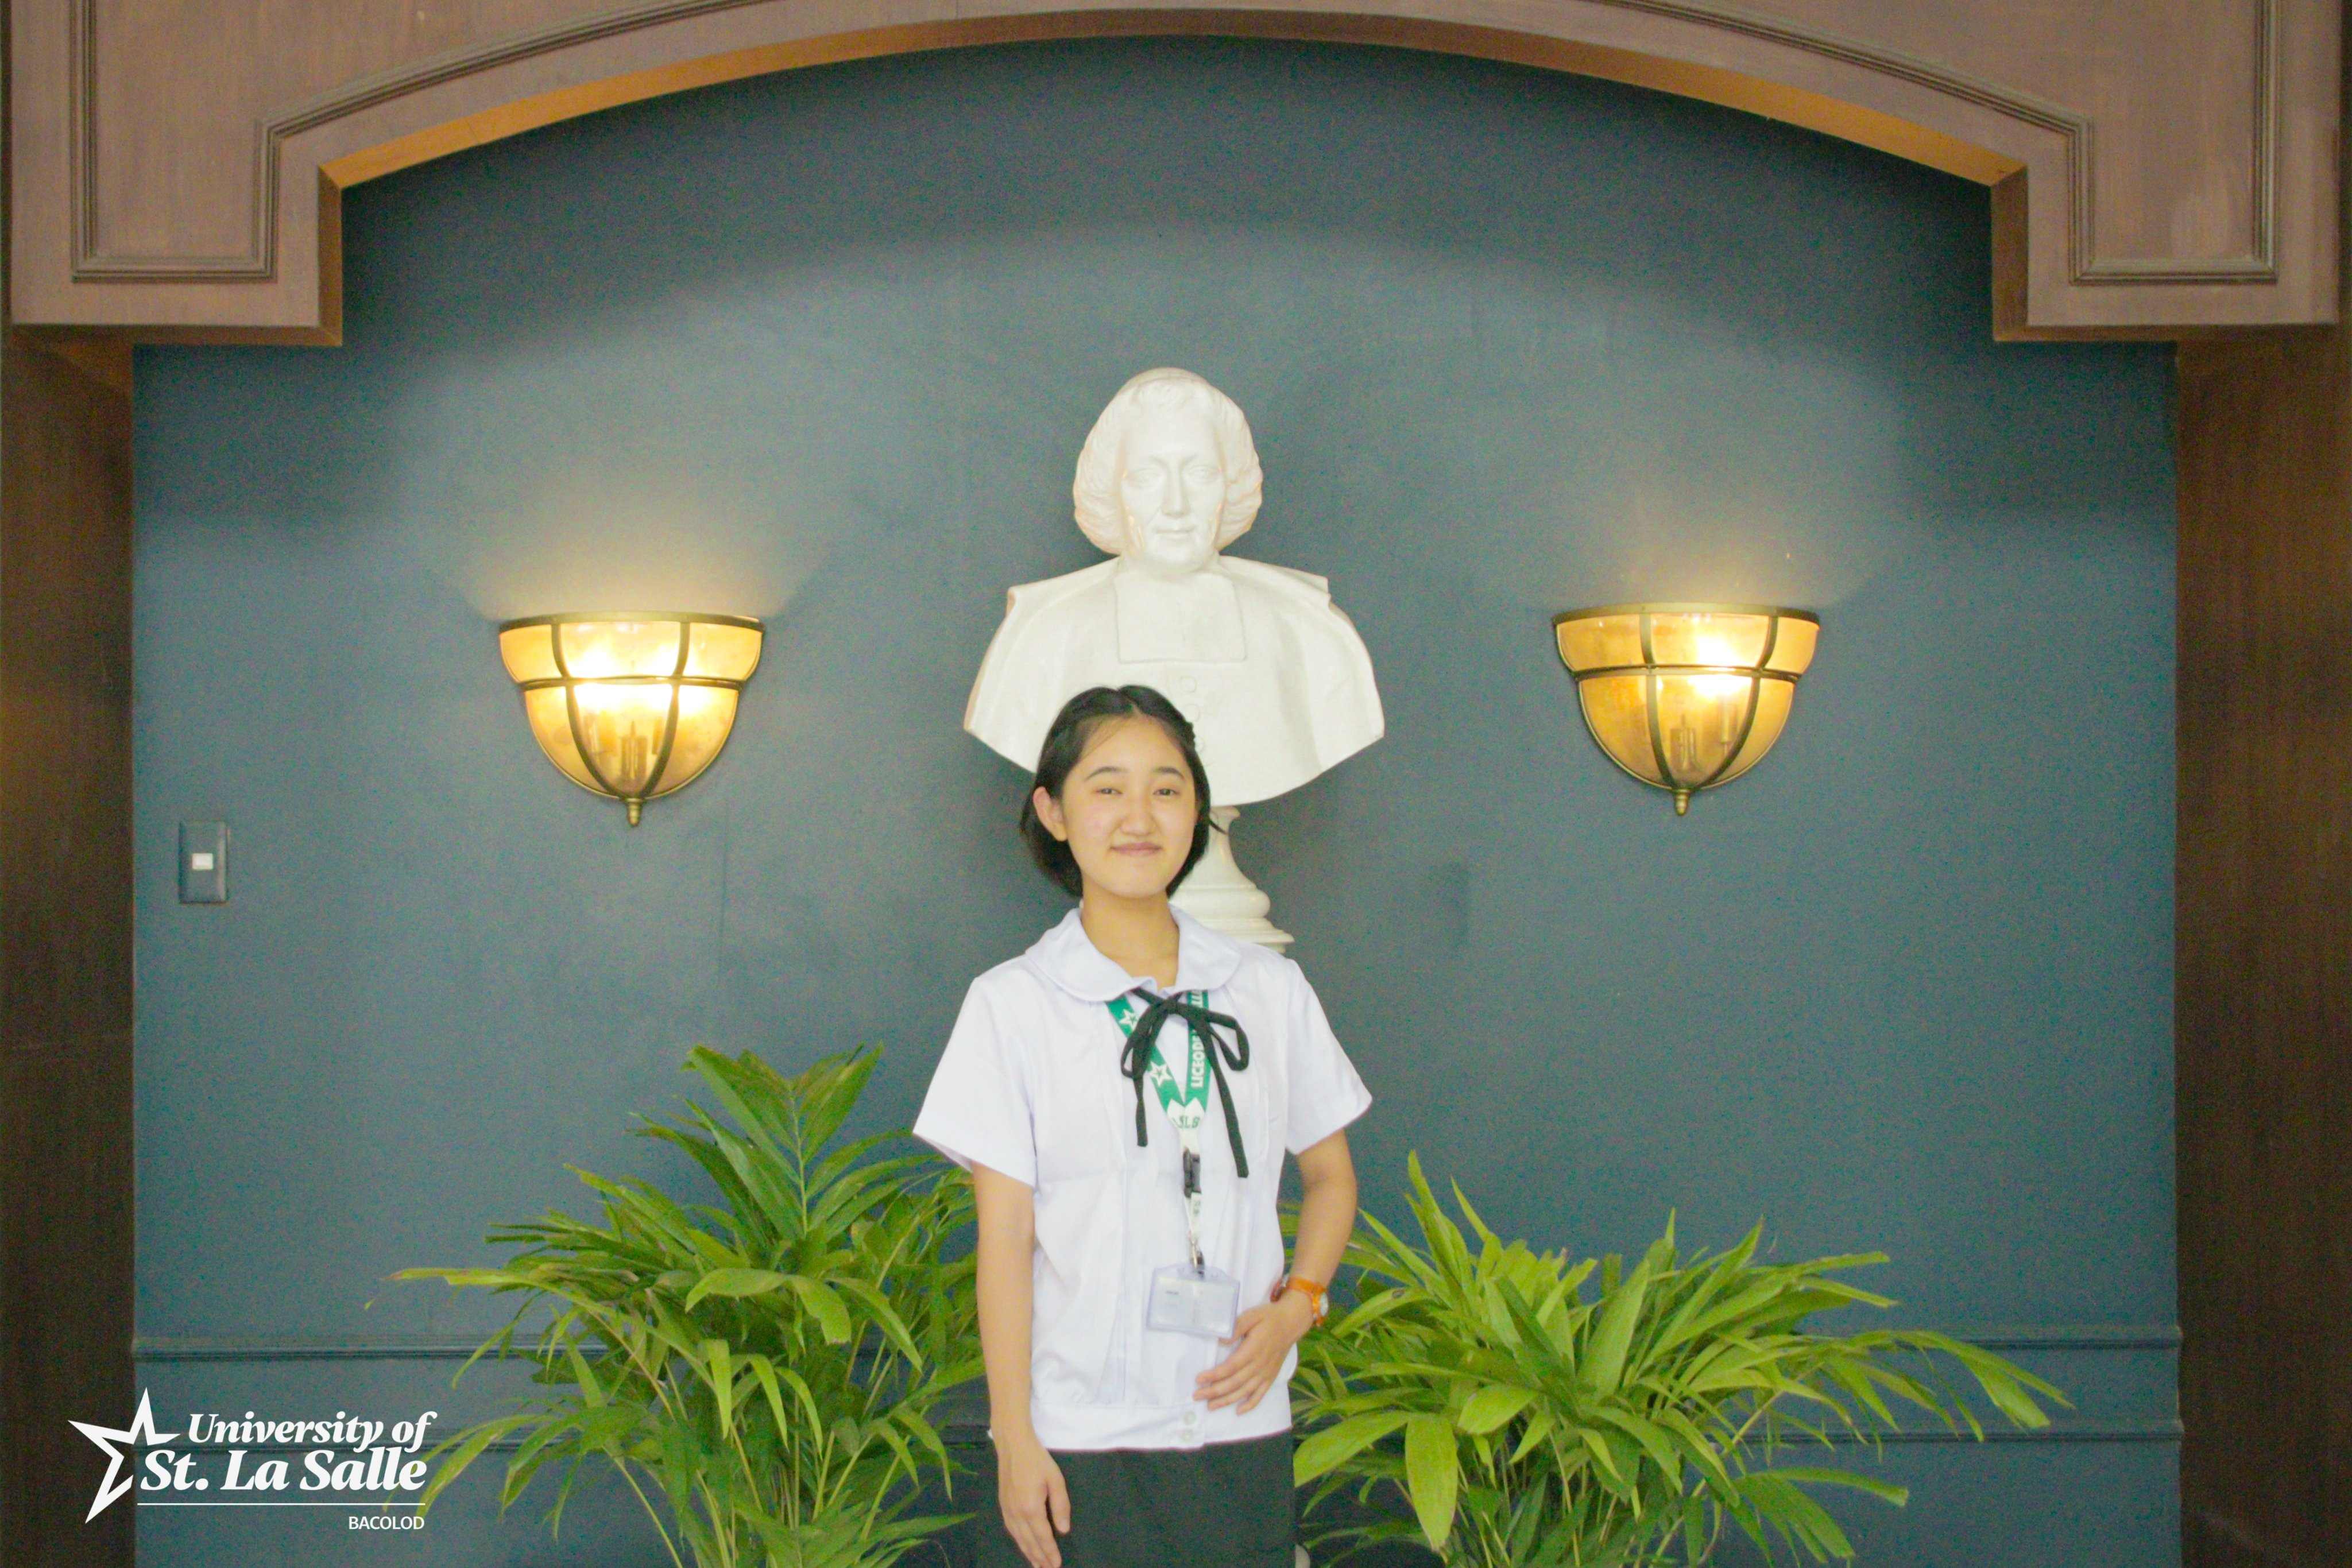 The-University-of-St-La-Salle-welcomes-AFS-Japan-Intercultural-Exchange-Student.png